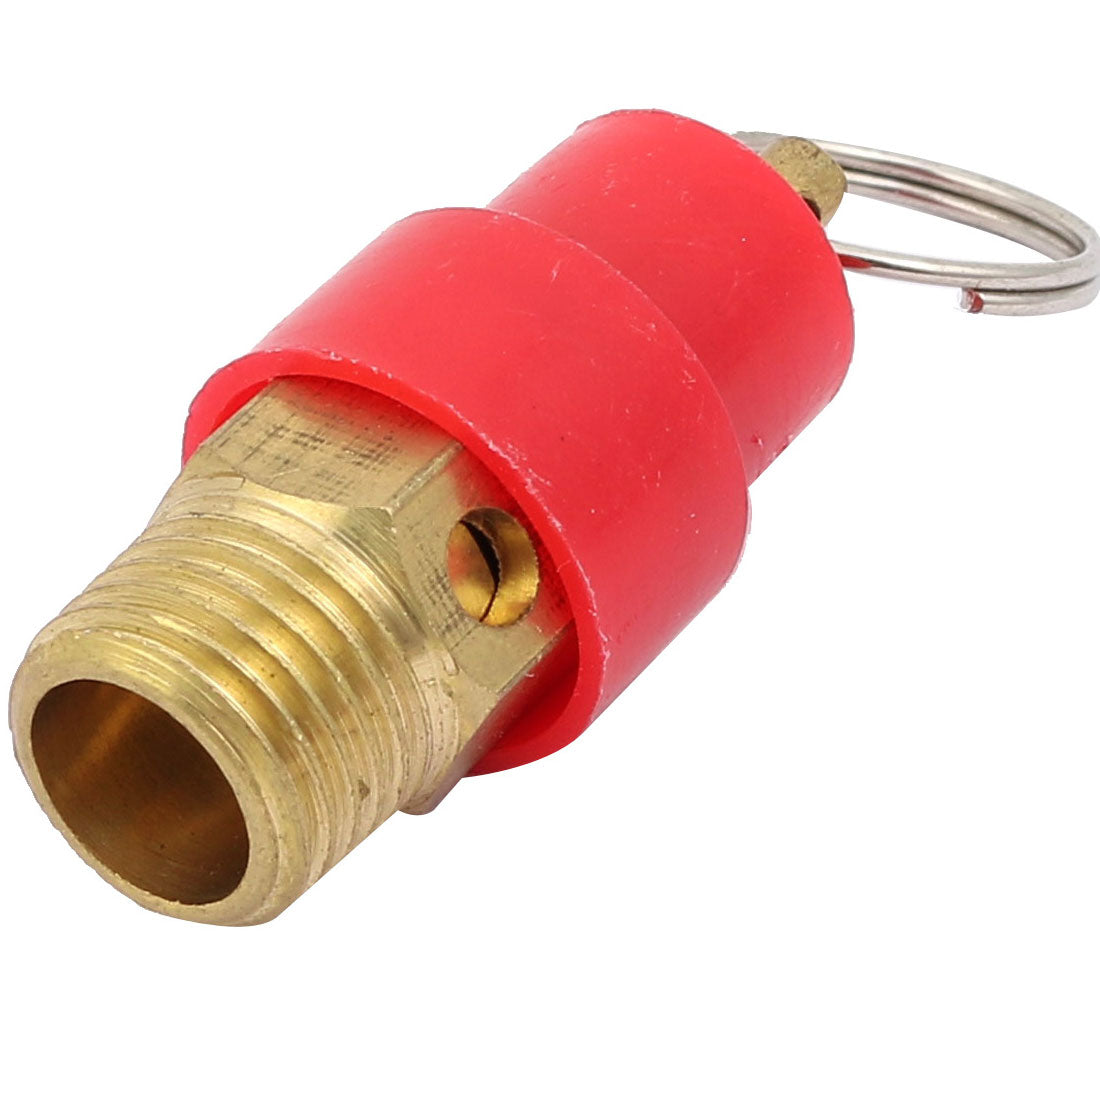 uxcell Uxcell Air Compressor Metal Ring Pressure Relief Valve Control Device 13mm Male Thread